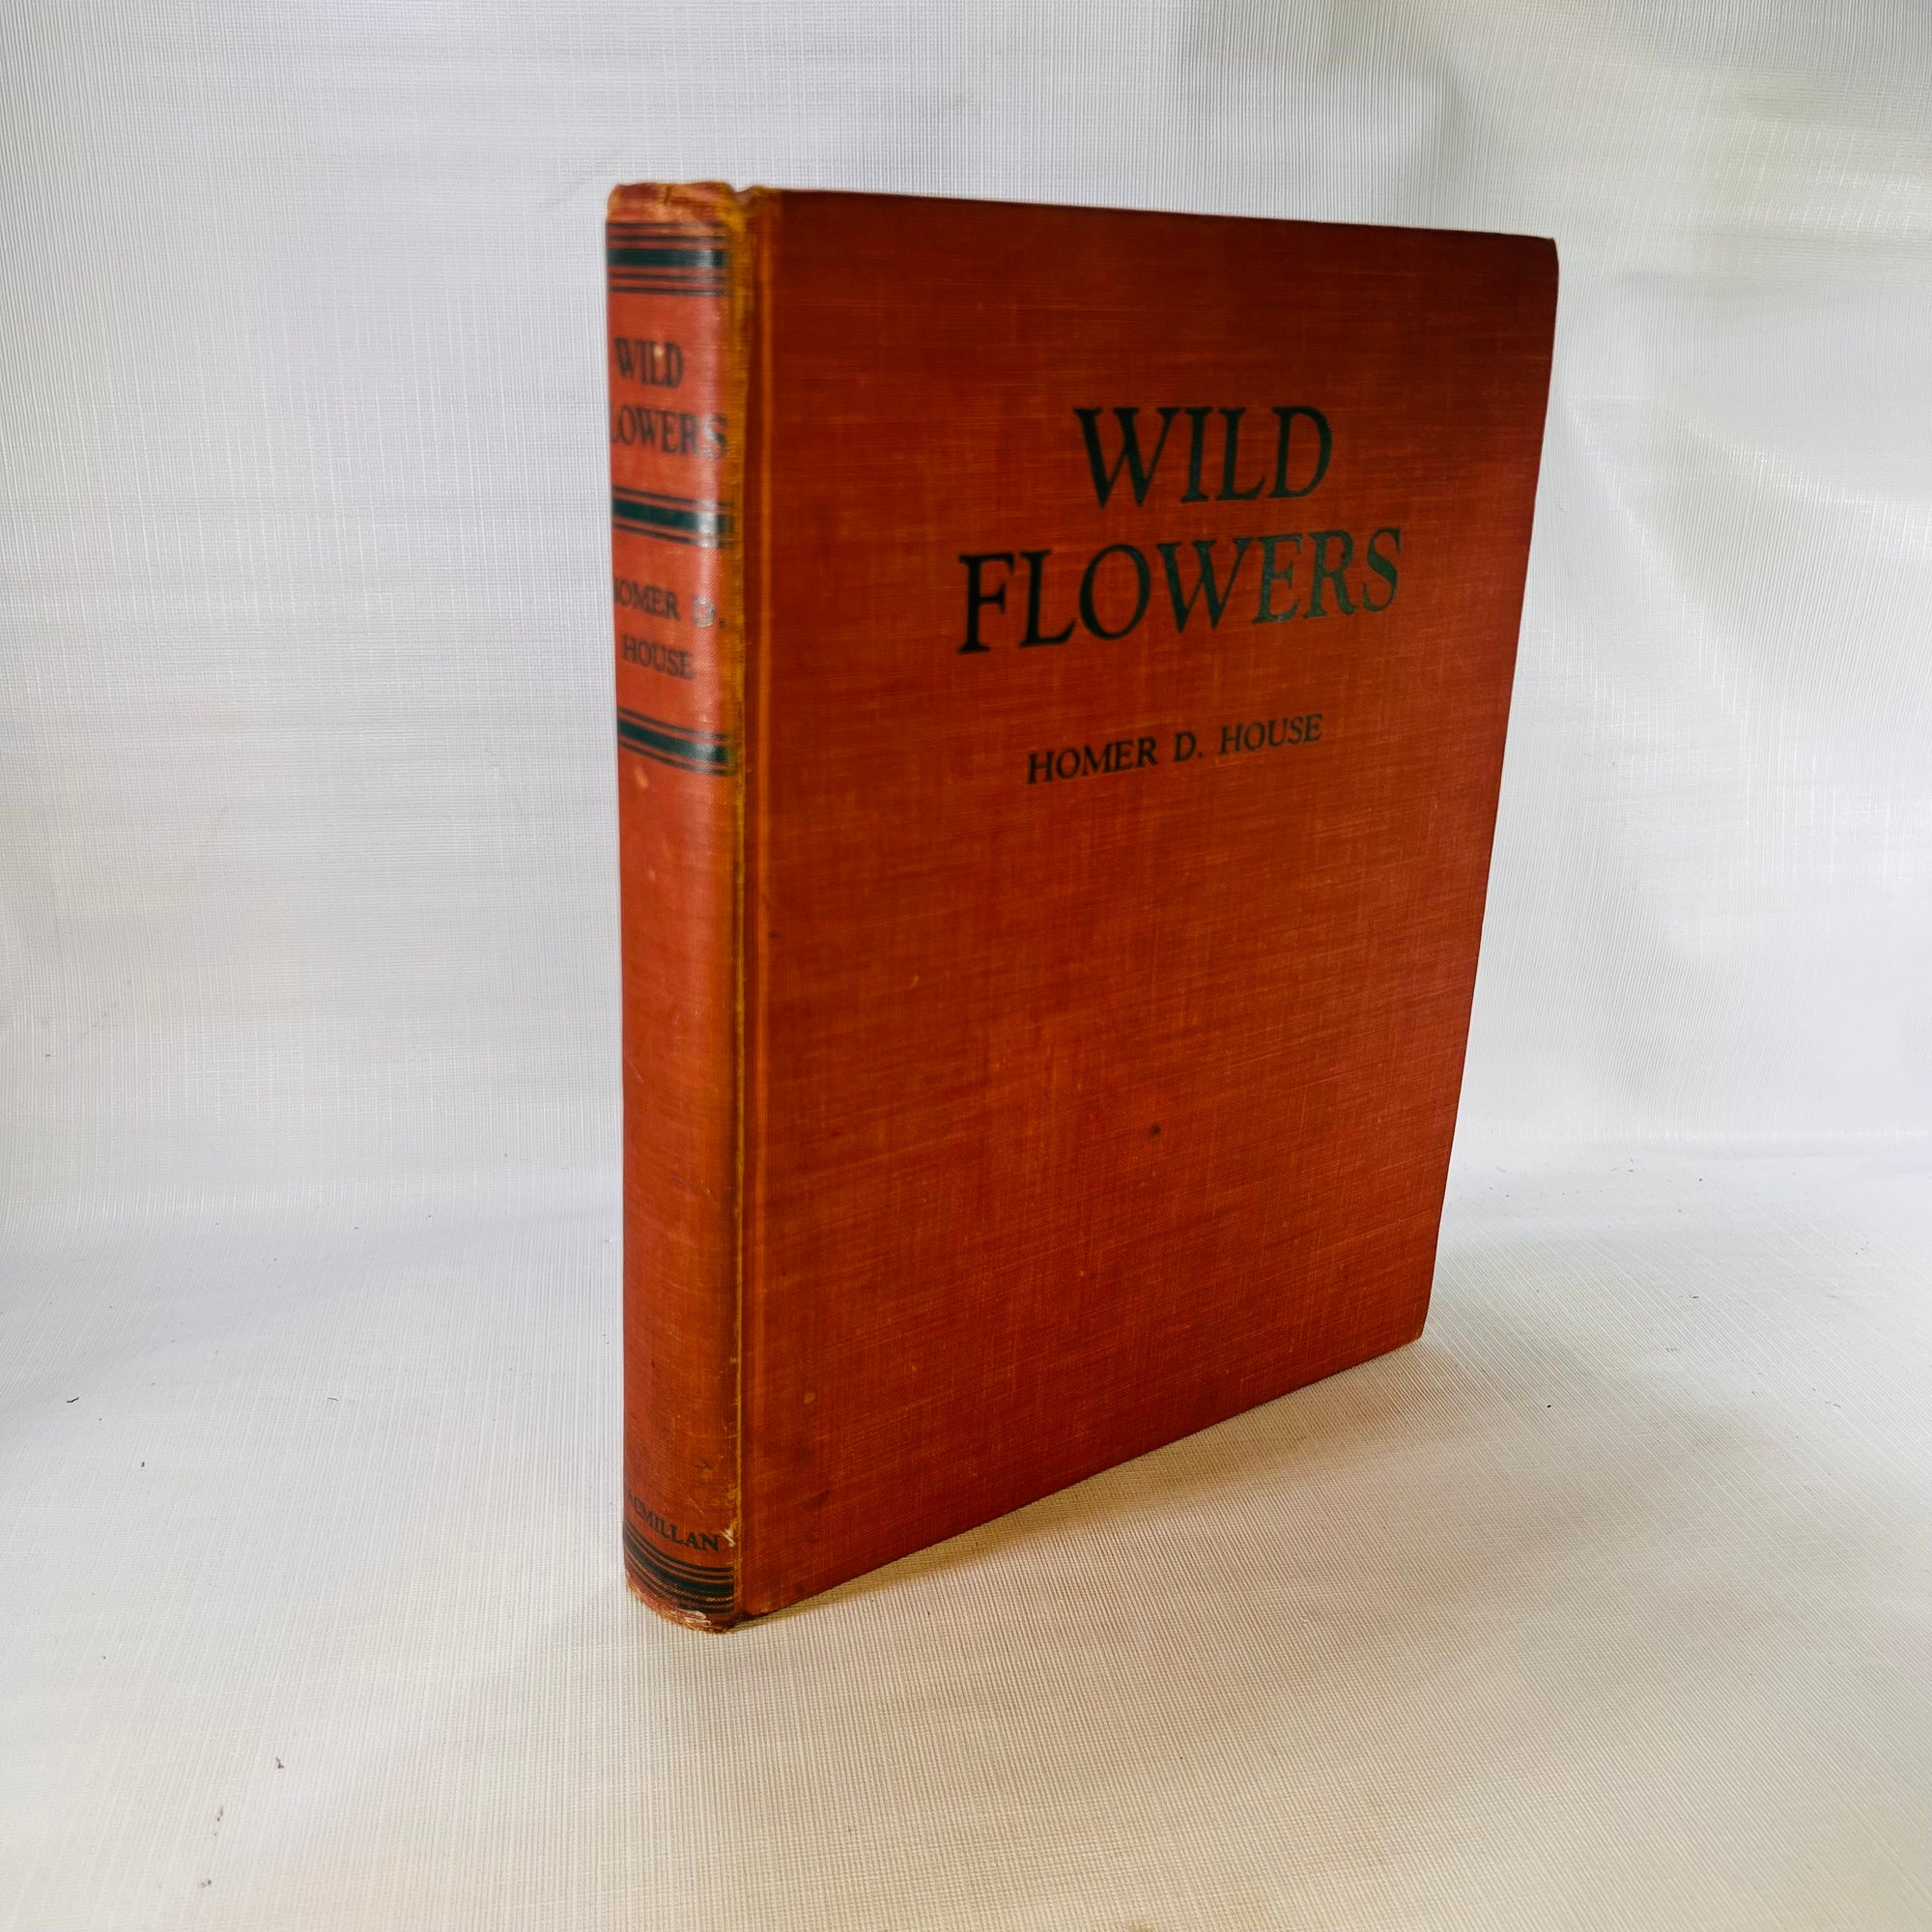 Wild Flowers by Homer D. House 1942 The Macmillan Company